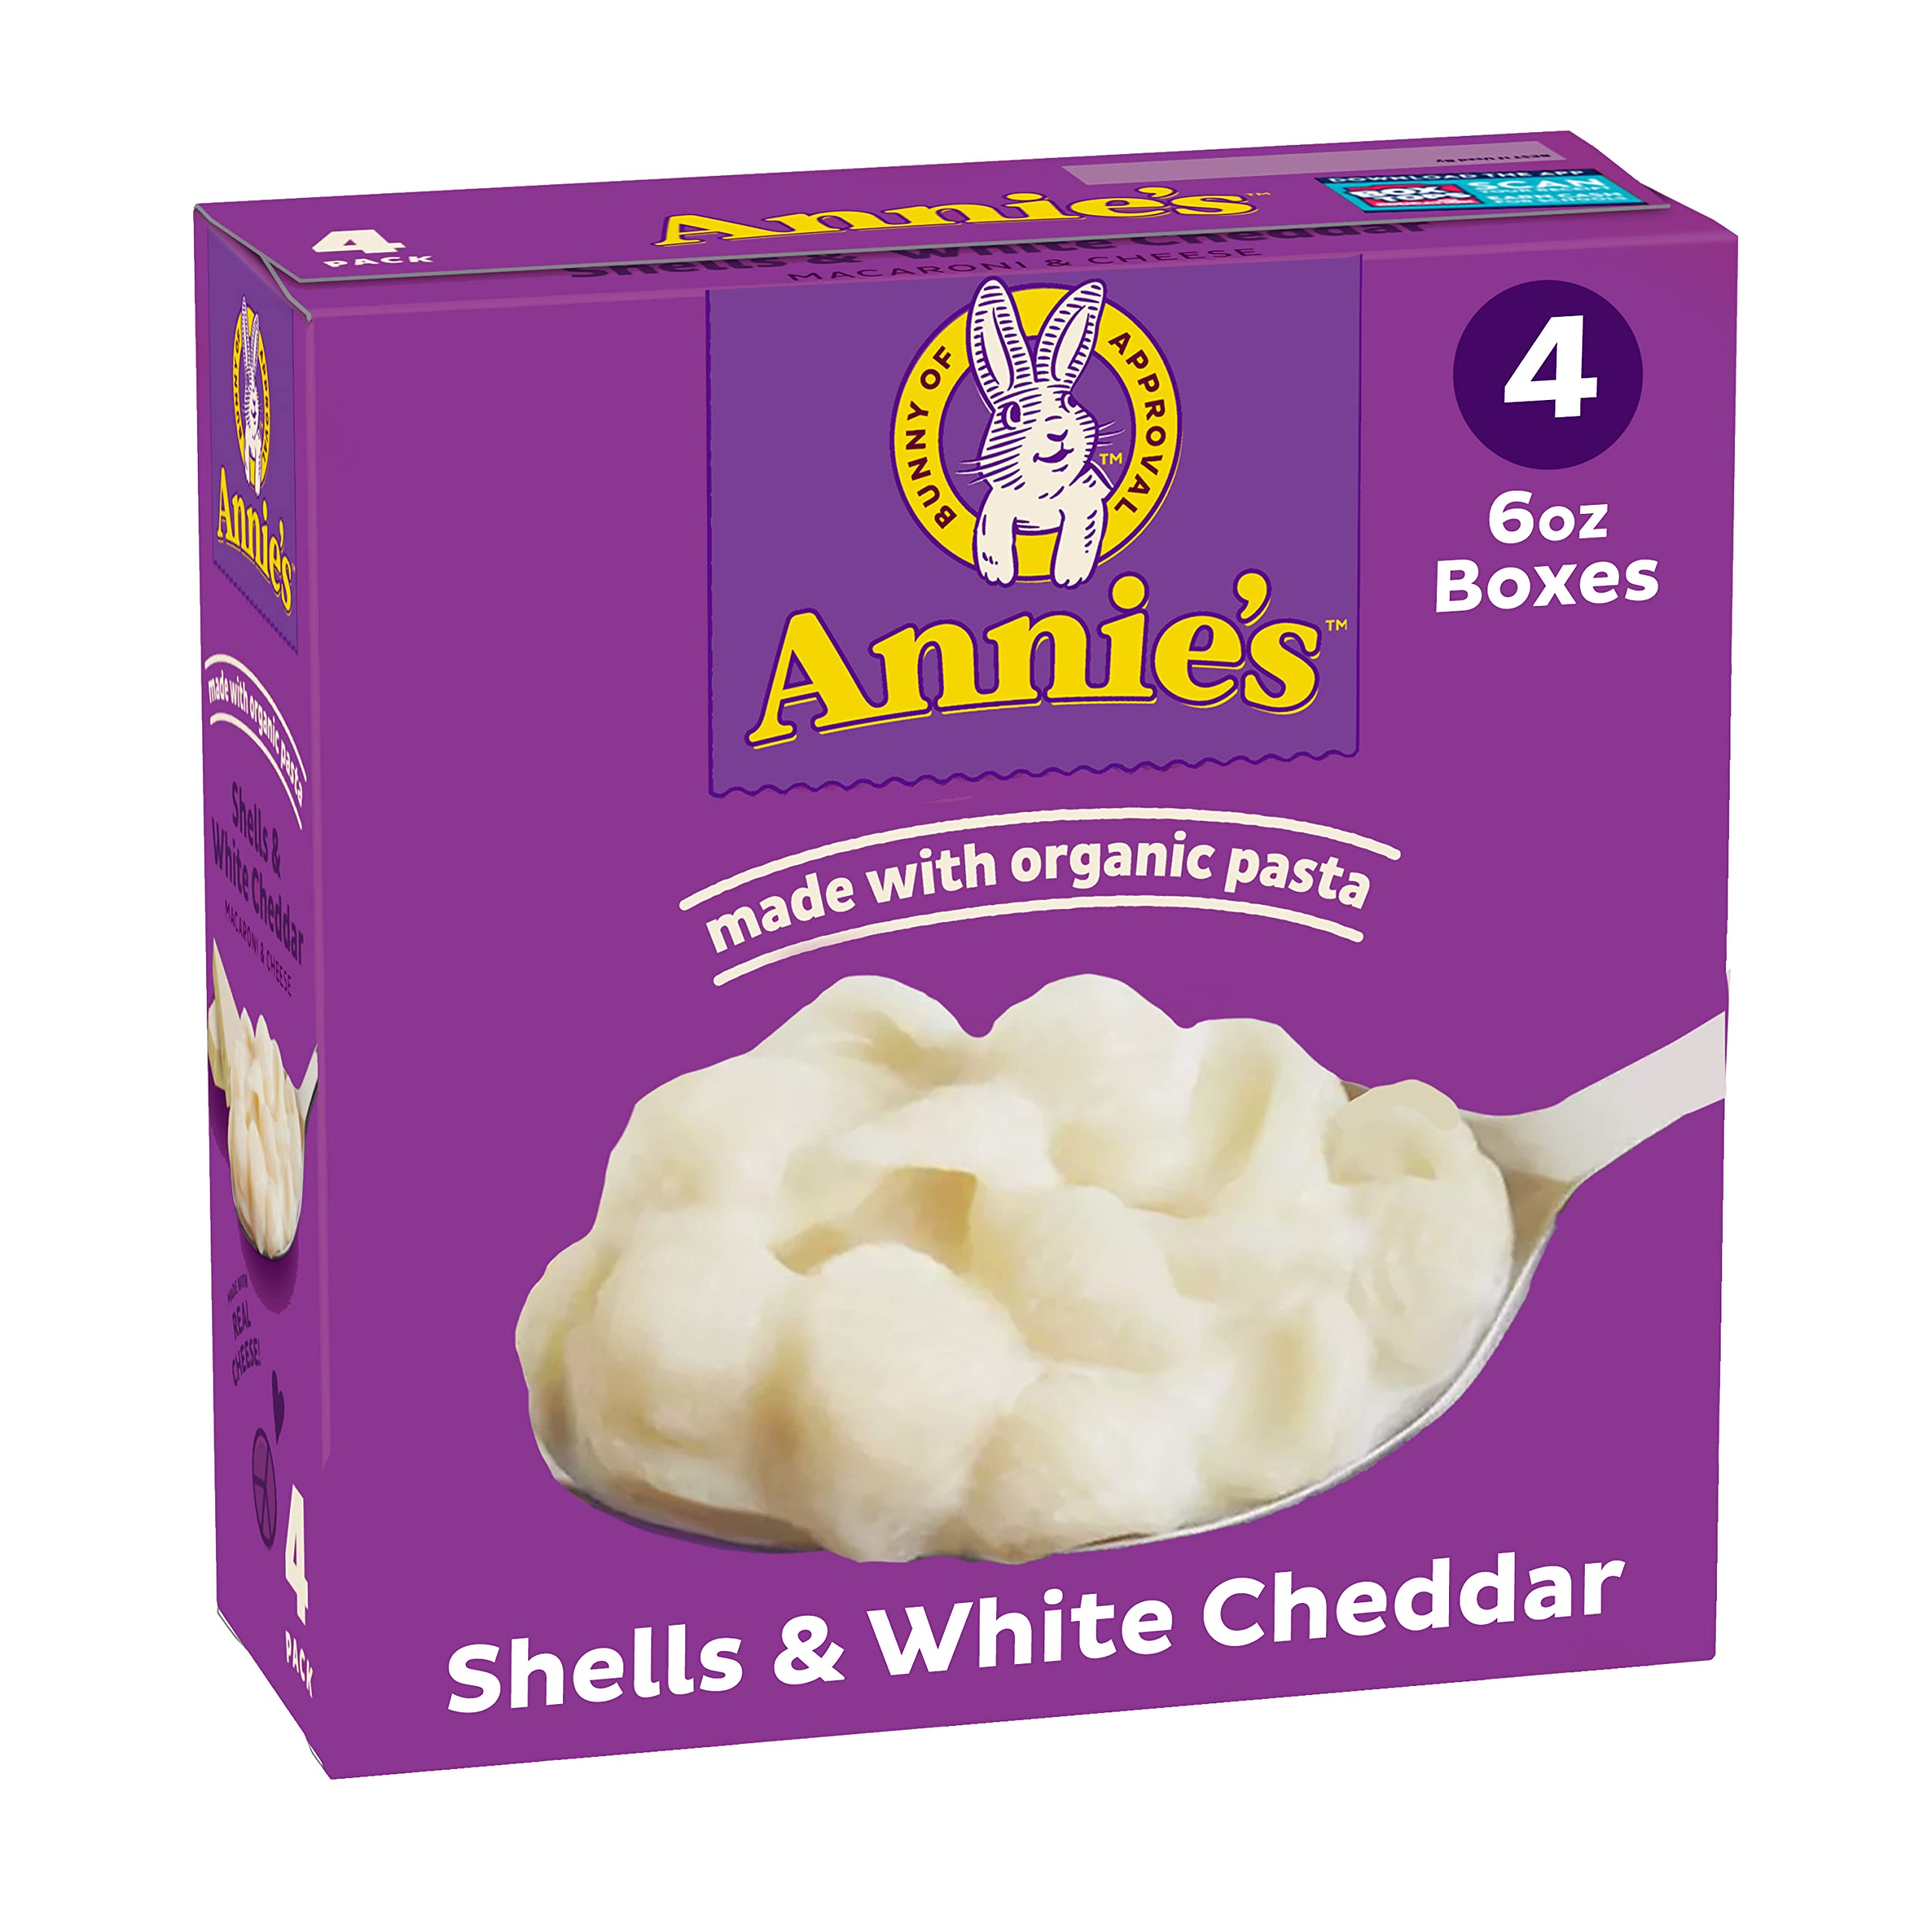 Annie's Macaroni & Cheese, Shells & White Cheddar, 12 Pack - 12 pack, 6 oz cartons